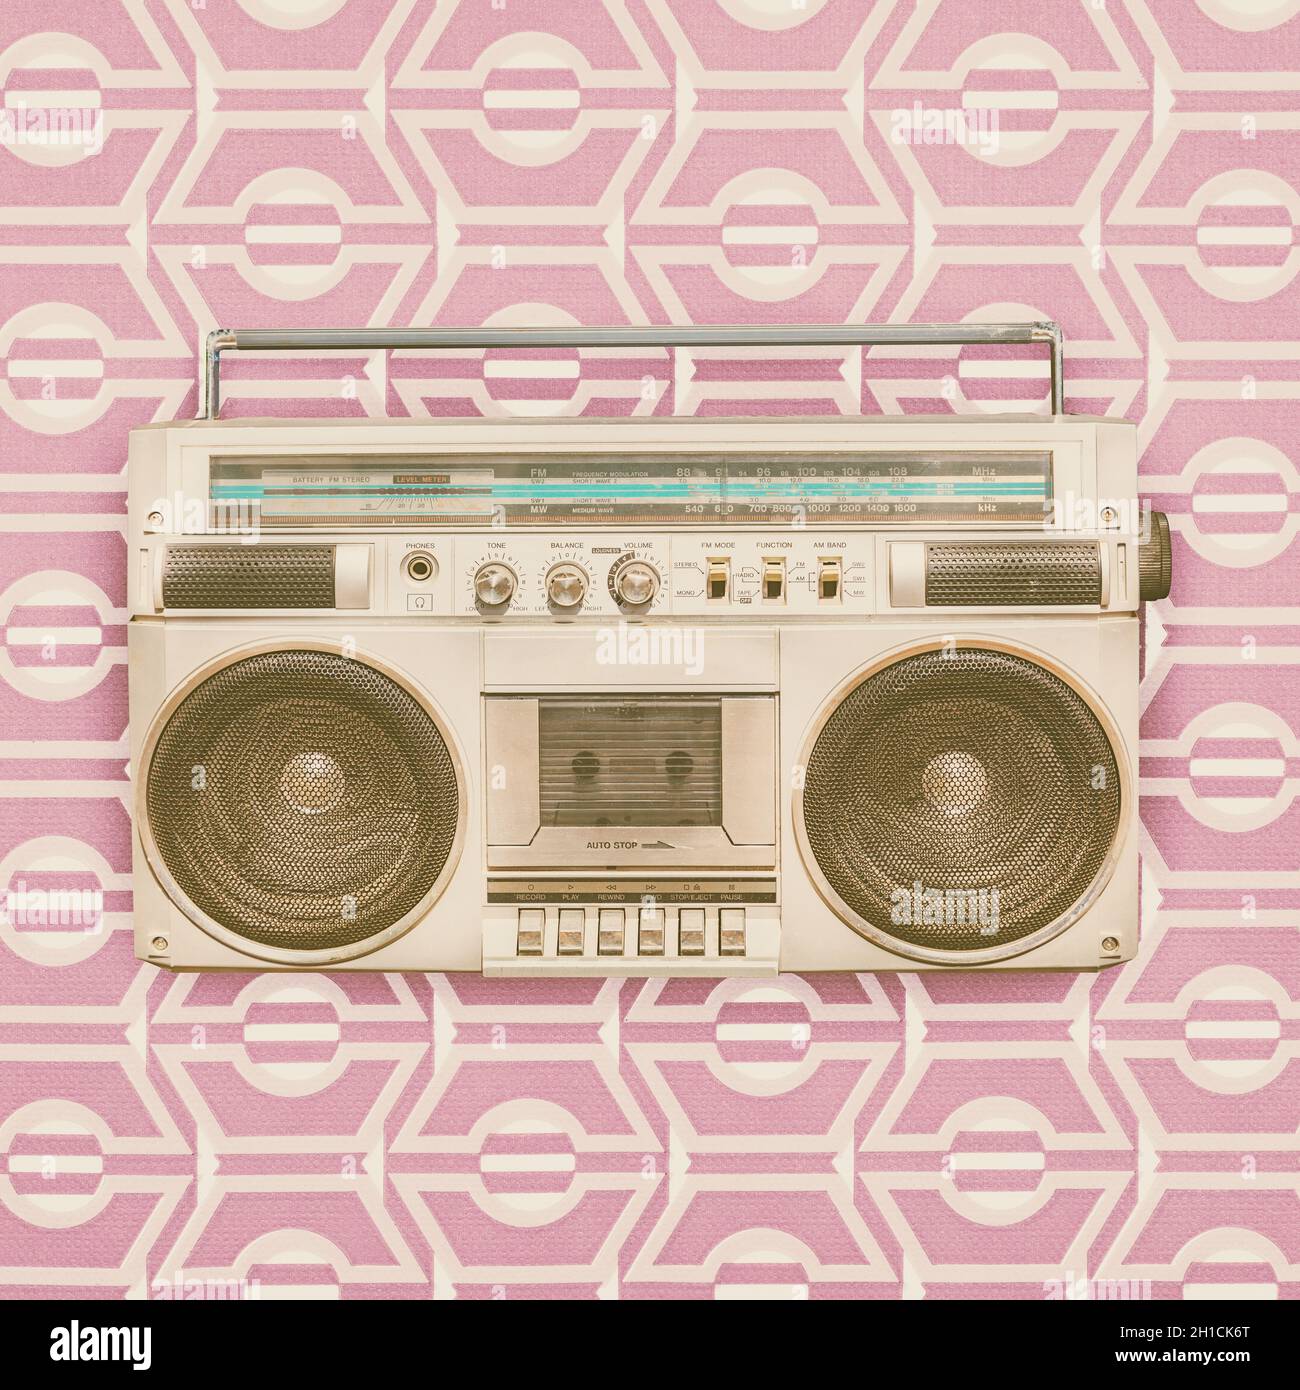 Retro styled image of an eighties portable radio cassette player in front of vintage wallpaper Stock Photo